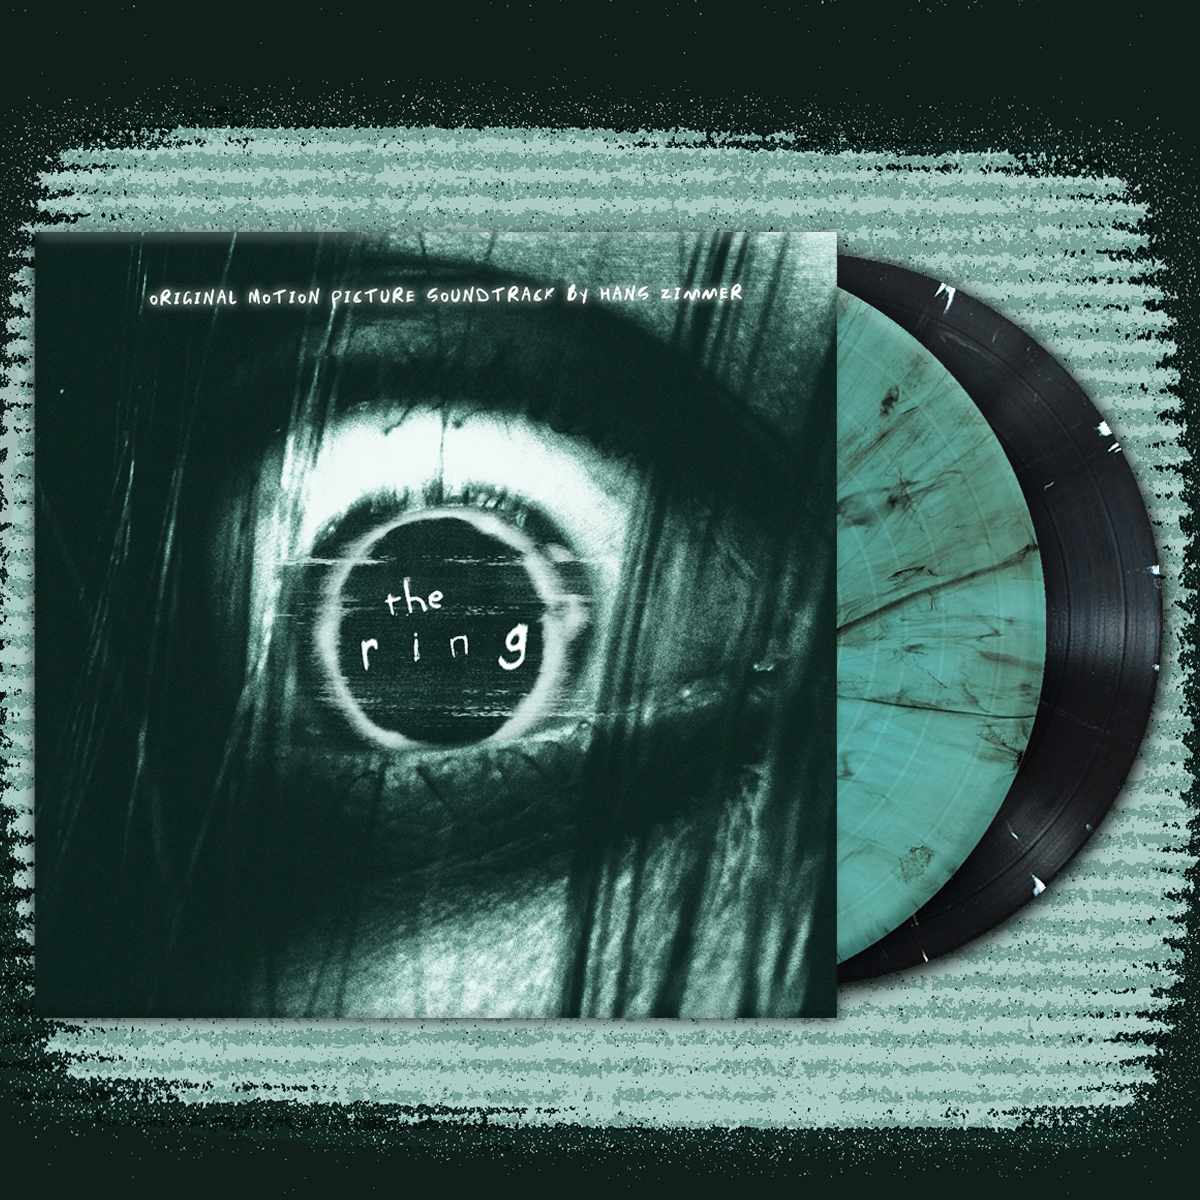 THE RING Original Motion Picture Soundrack 2xLP by @HansZimmer is available to pre-order now! bit.ly/3WlbAHr